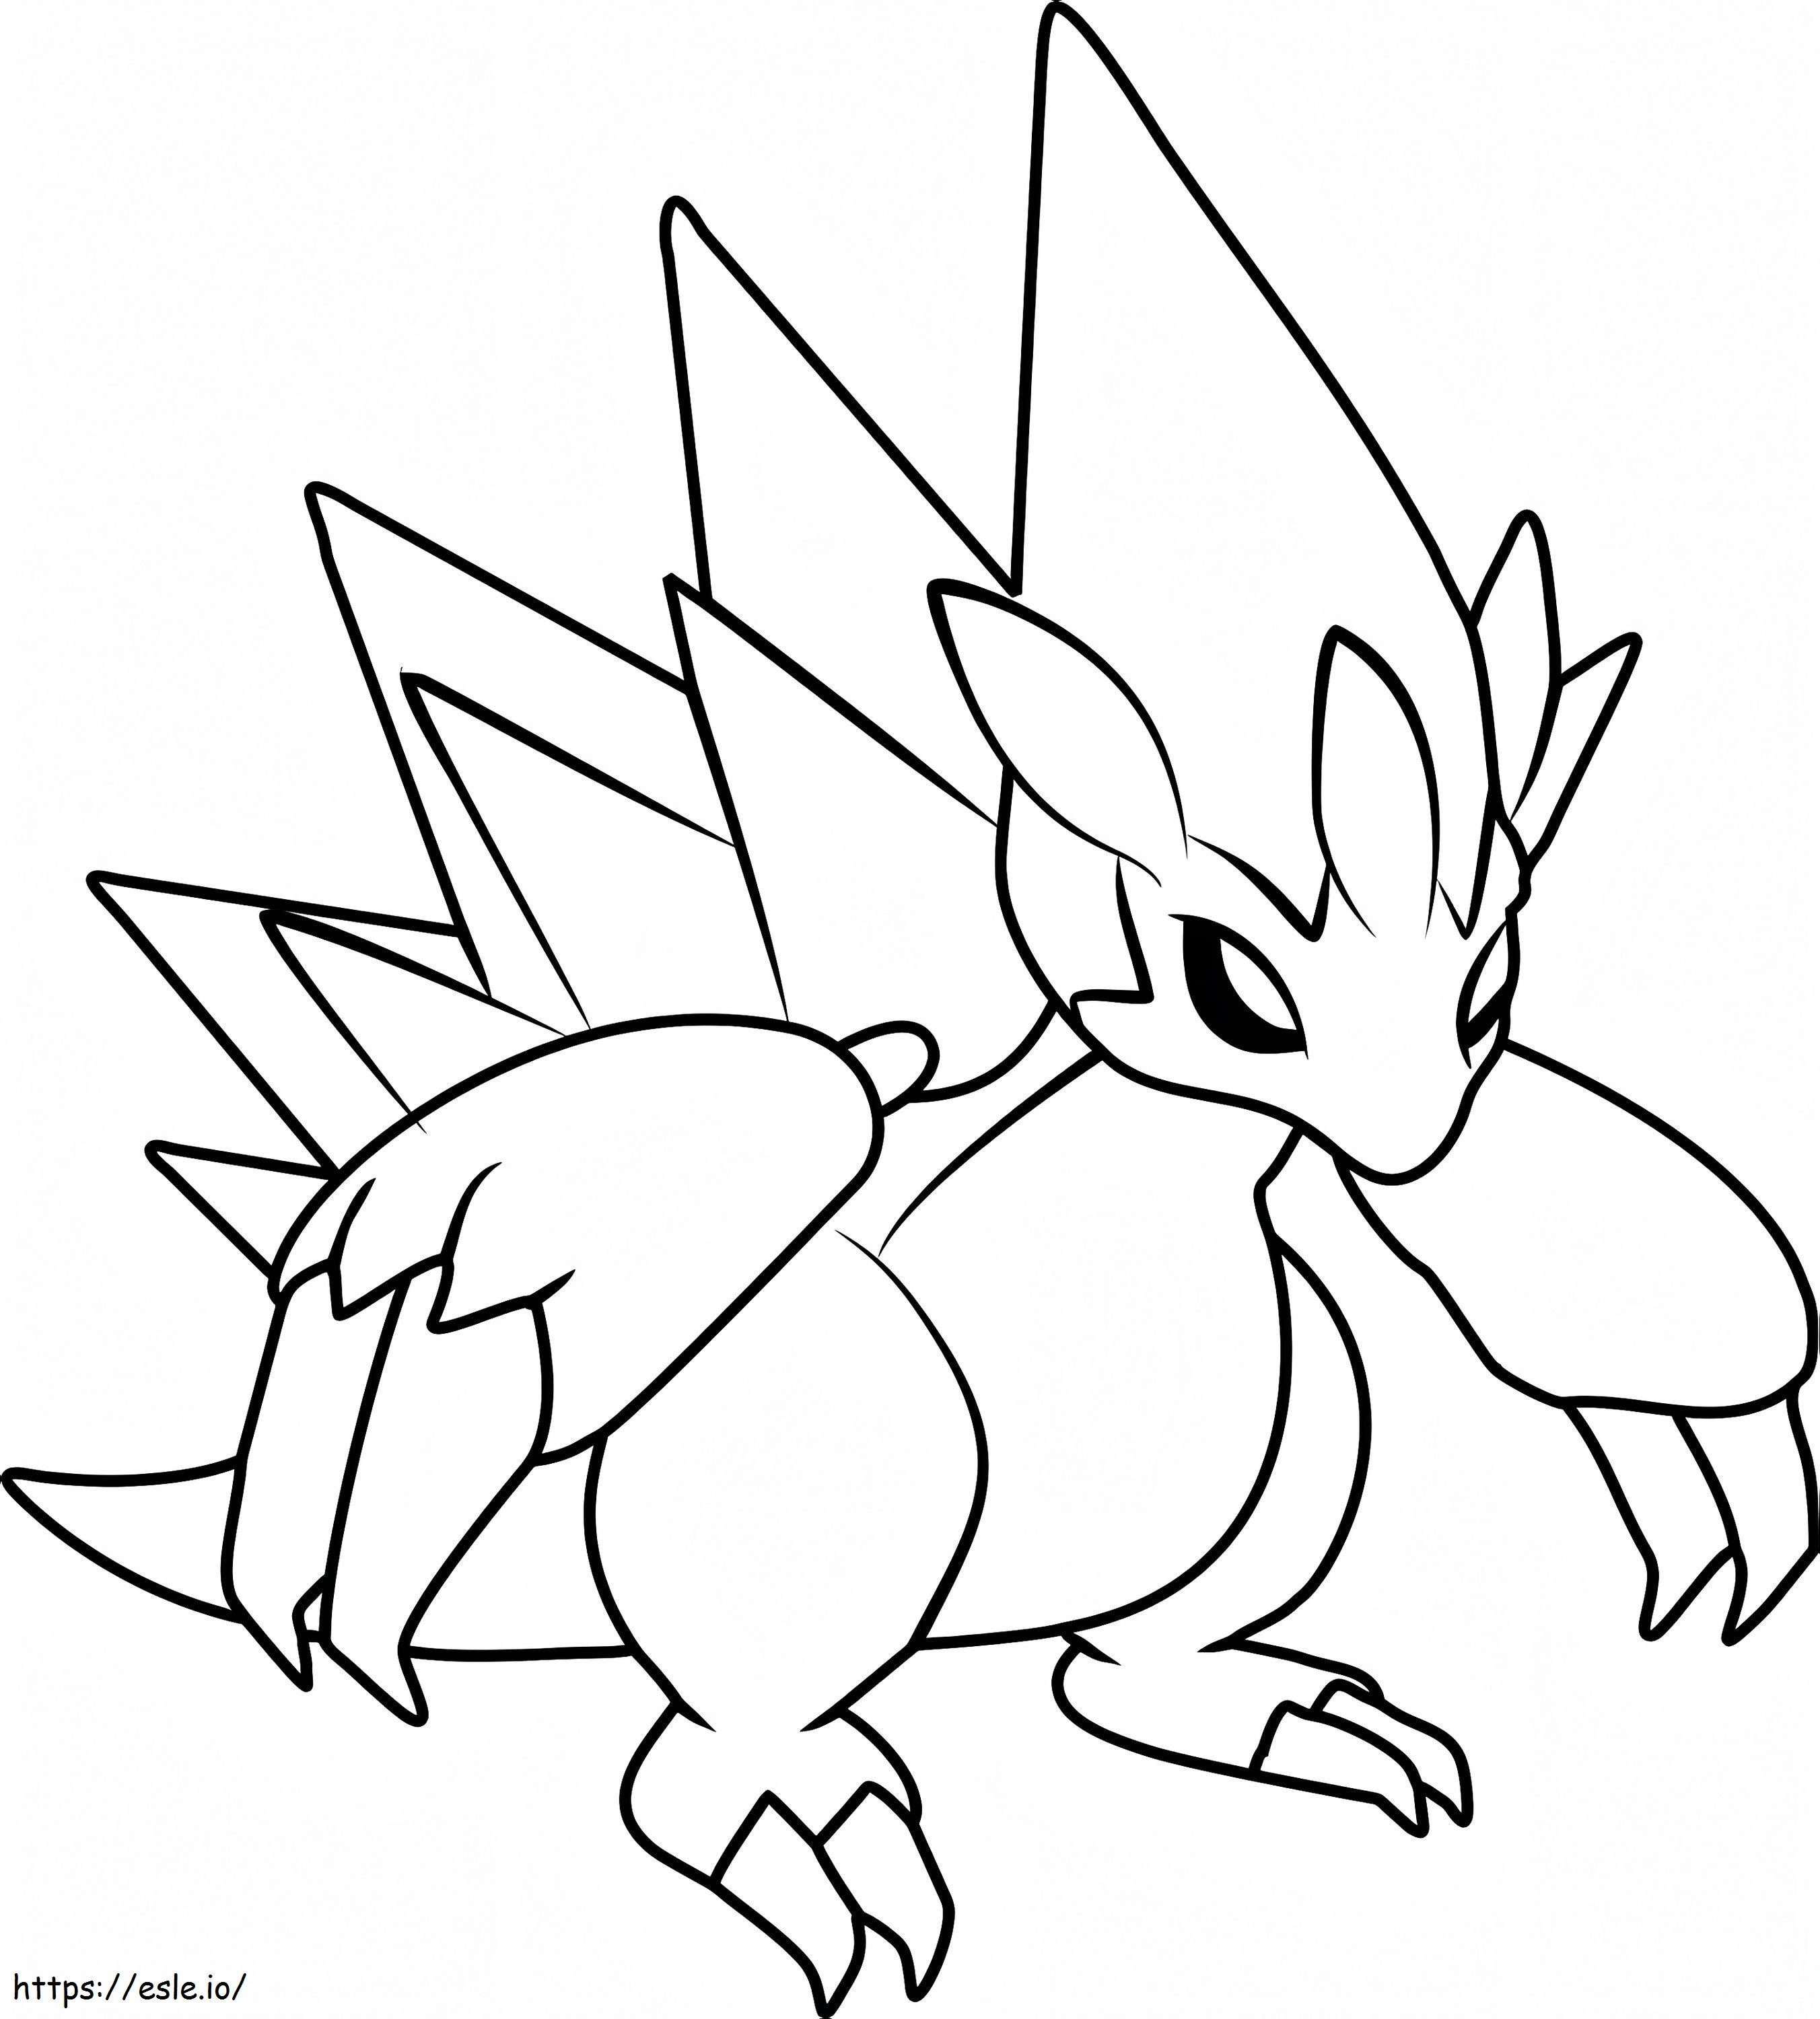 1529604940_22 coloring page